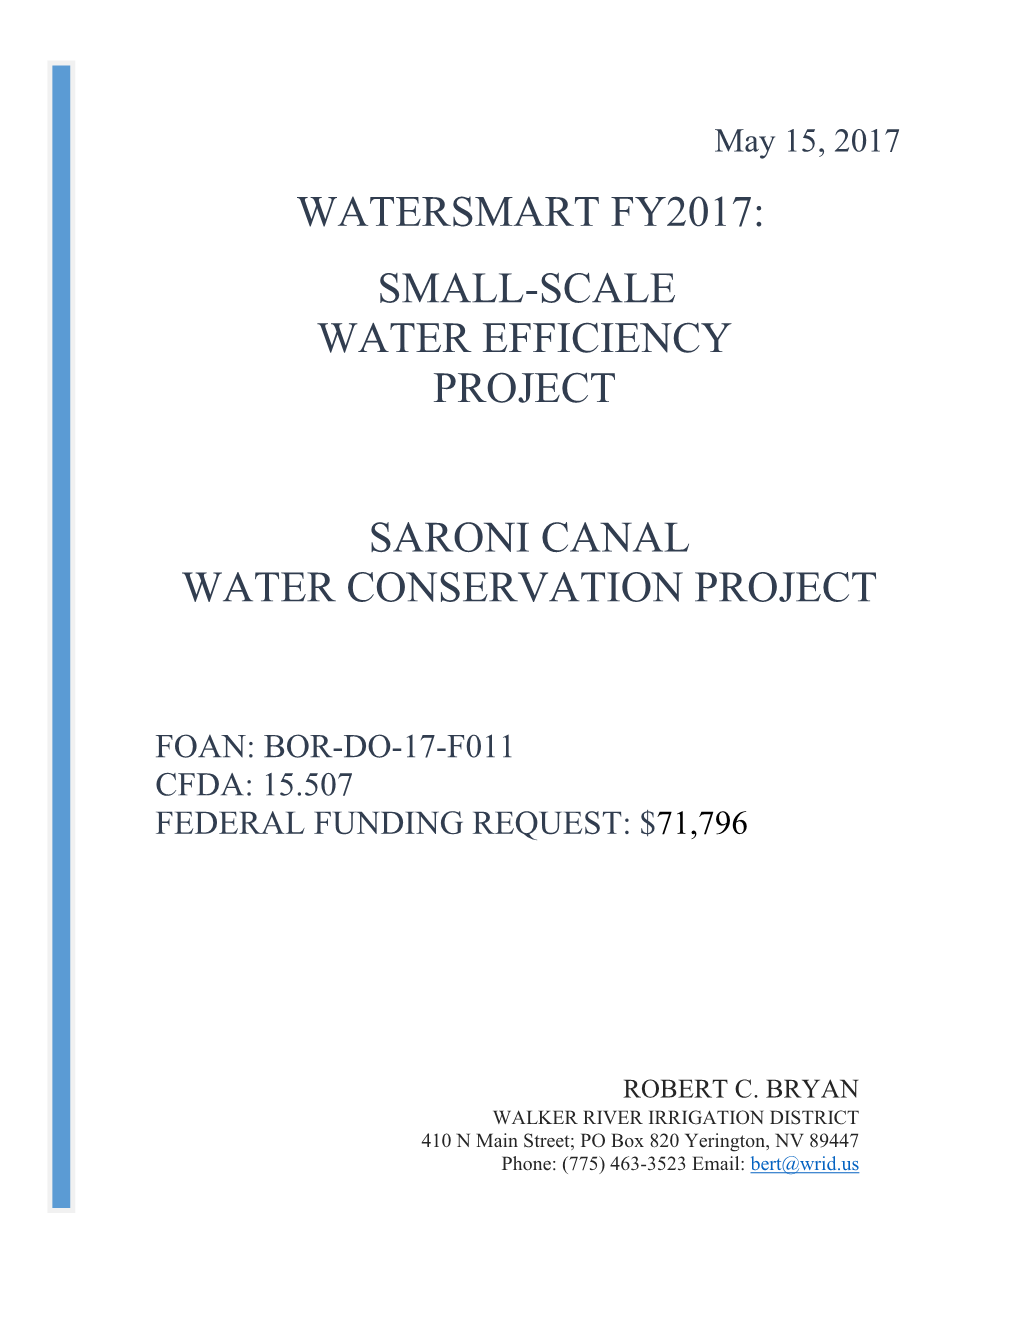 Watersmart Fy2017: Small-Scale Water Efficiency Project Saroni Canal Water Conservation Project